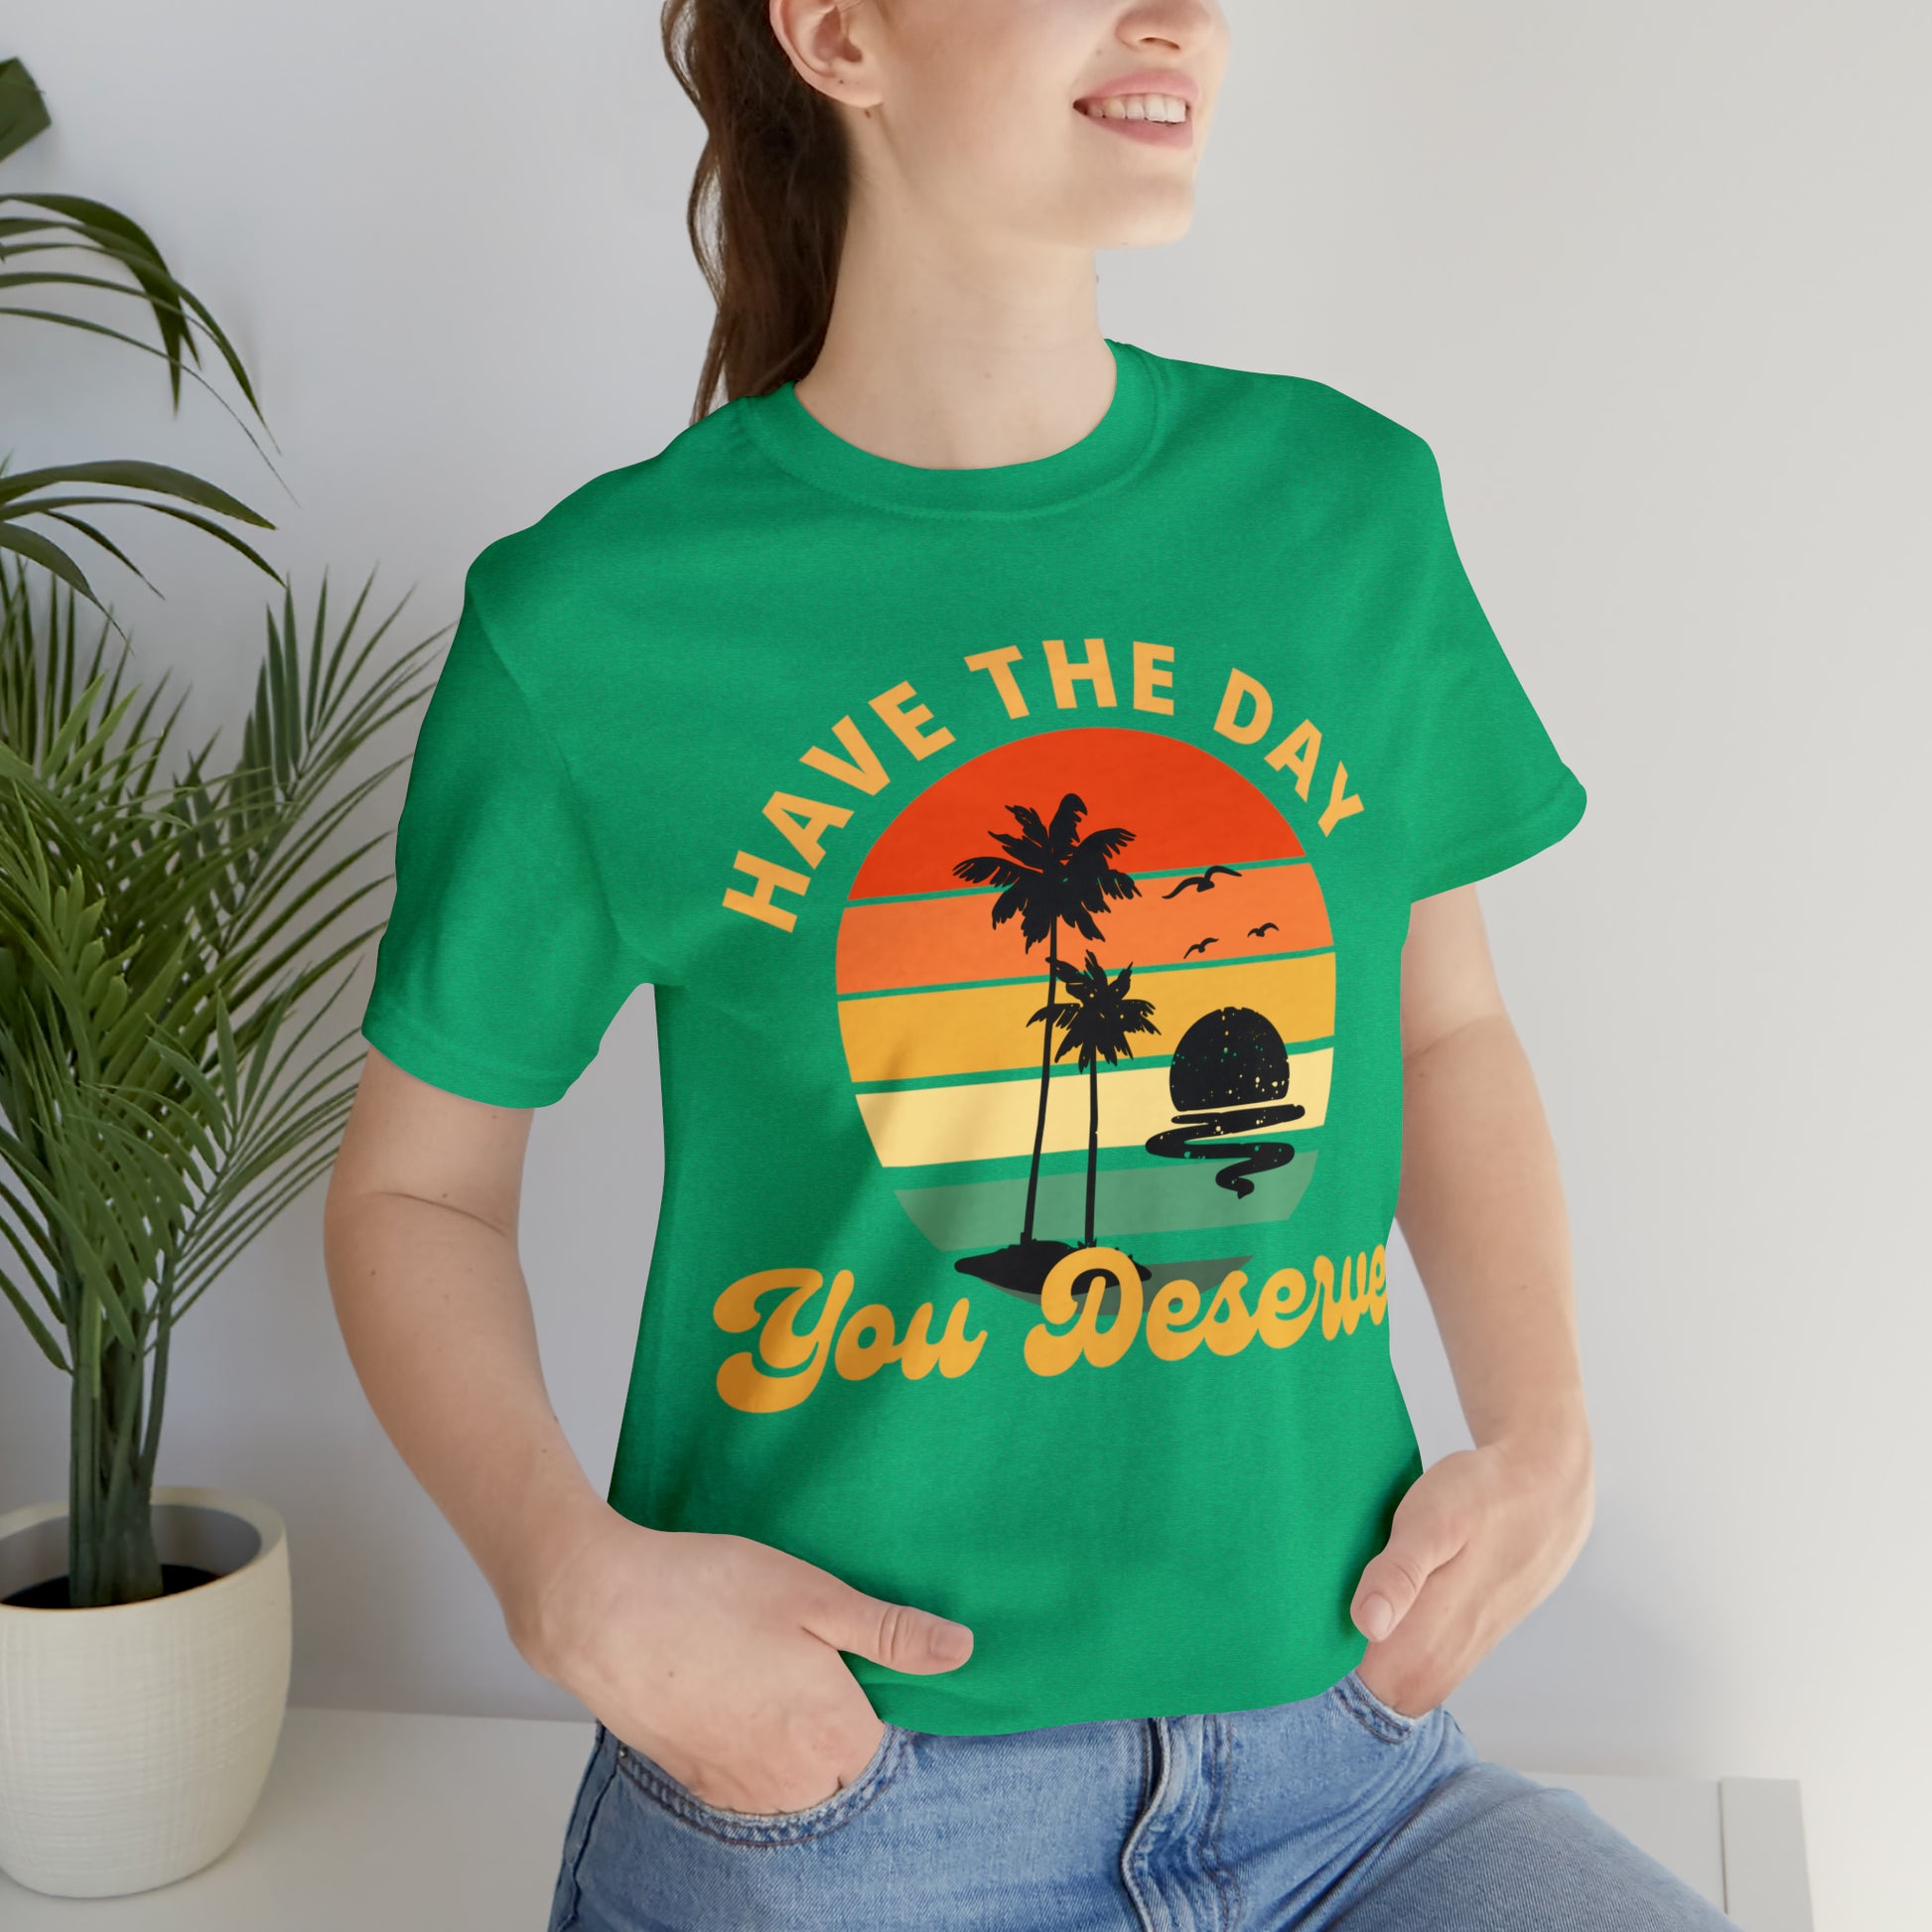 Have The Day You Deserve Shirt Inspirational Graphic Tee Motivational Tee  Positive Vibes Shirt Trendy And Eye Catching Tees Have The Day You Deserve  Meme Shirt New - Revetee